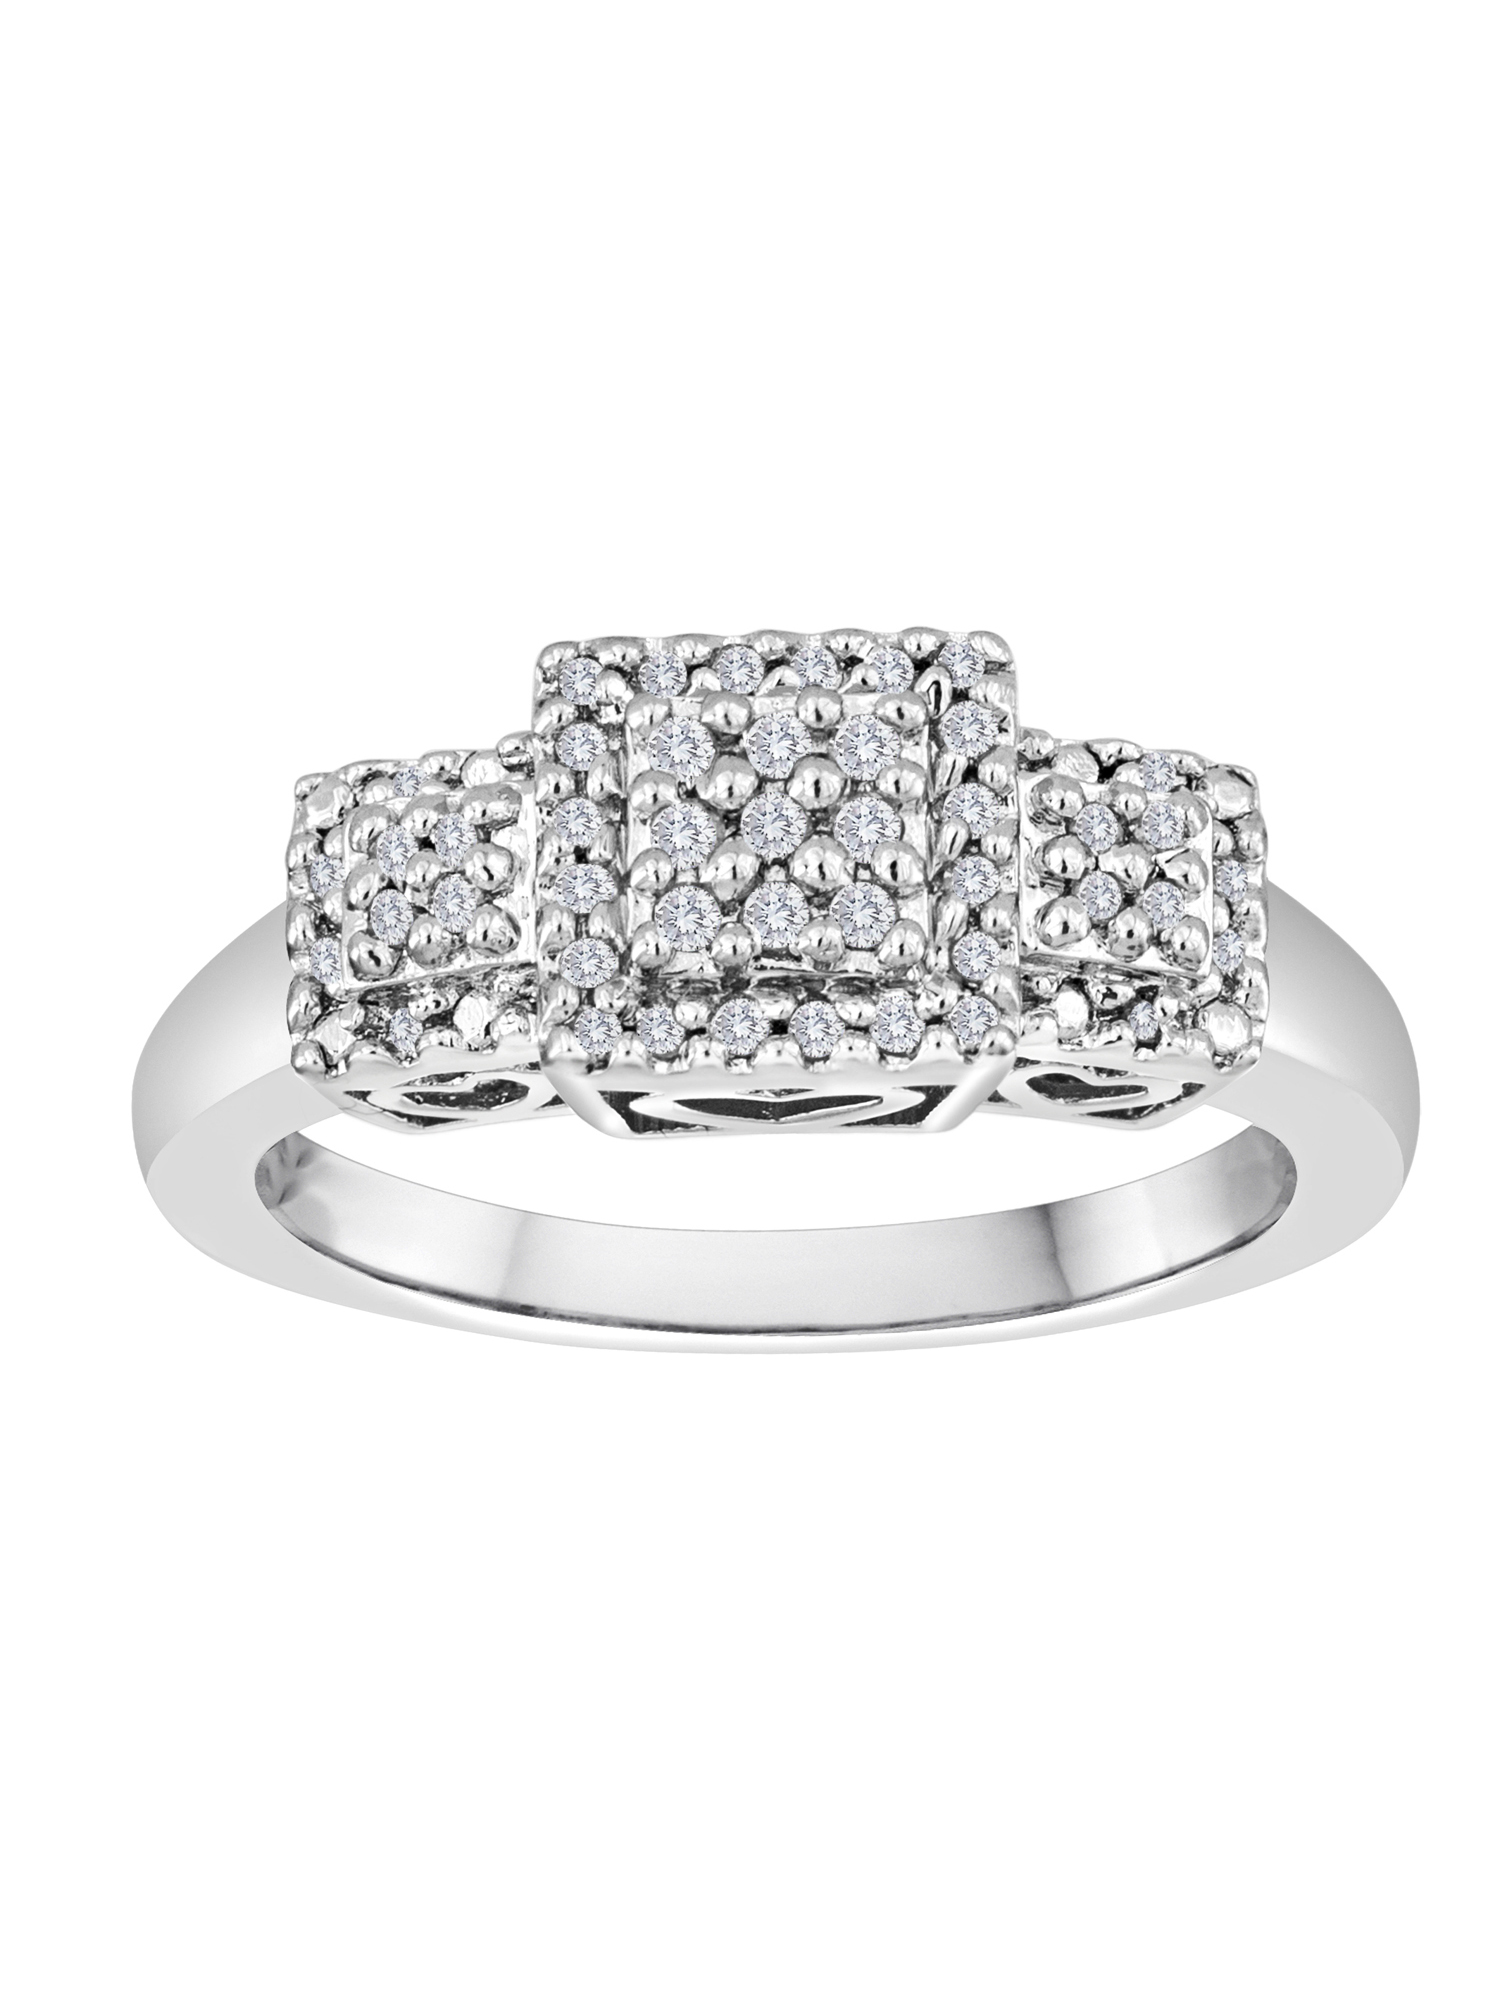 1/6 Carat T.W. Diamond Sterling Silver 3-Station Ring - image 1 of 3